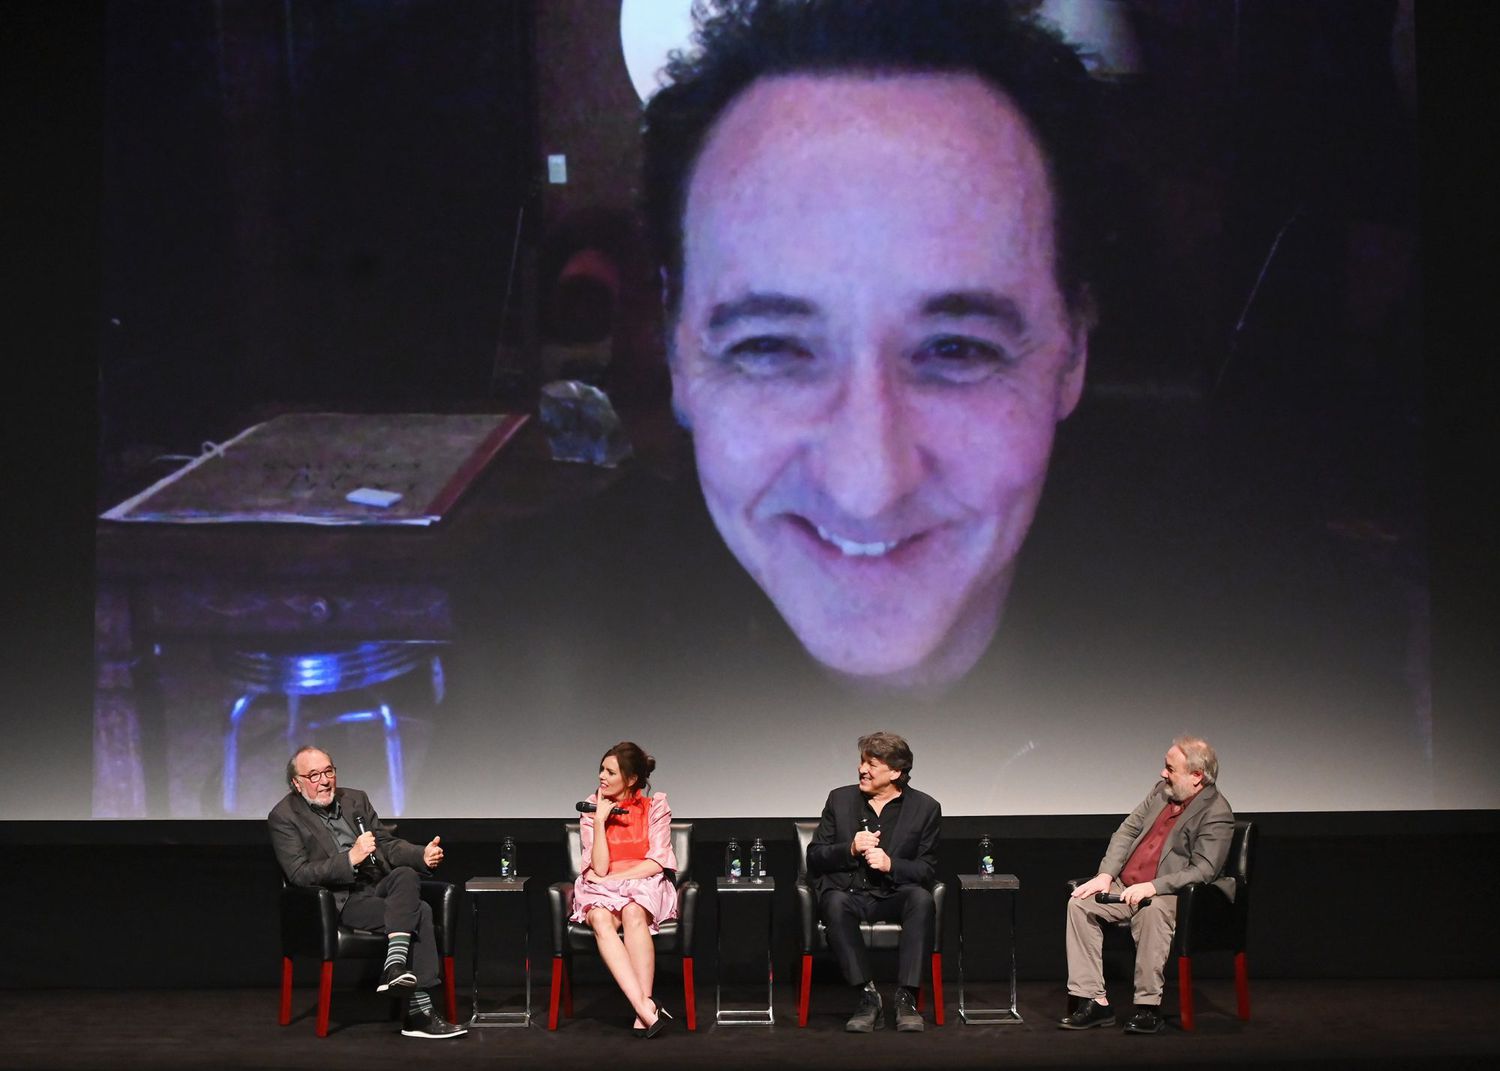 NEW YORK, NEW YORK - APRIL 30: A live skype feed with, John Cusack, Executive Producer James L. Brooks, Ione Skye, Director Cameron Crowe and moderator David Edelstein speak at the screening of "Say Anything..." 30th Anniversary - 2019 Tribeca Film Festival at BMCC Tribeca PAC on April 30, 2019 in New York City. (Photo by Nicholas Hunt/Getty Images for Tribeca Film Festival)